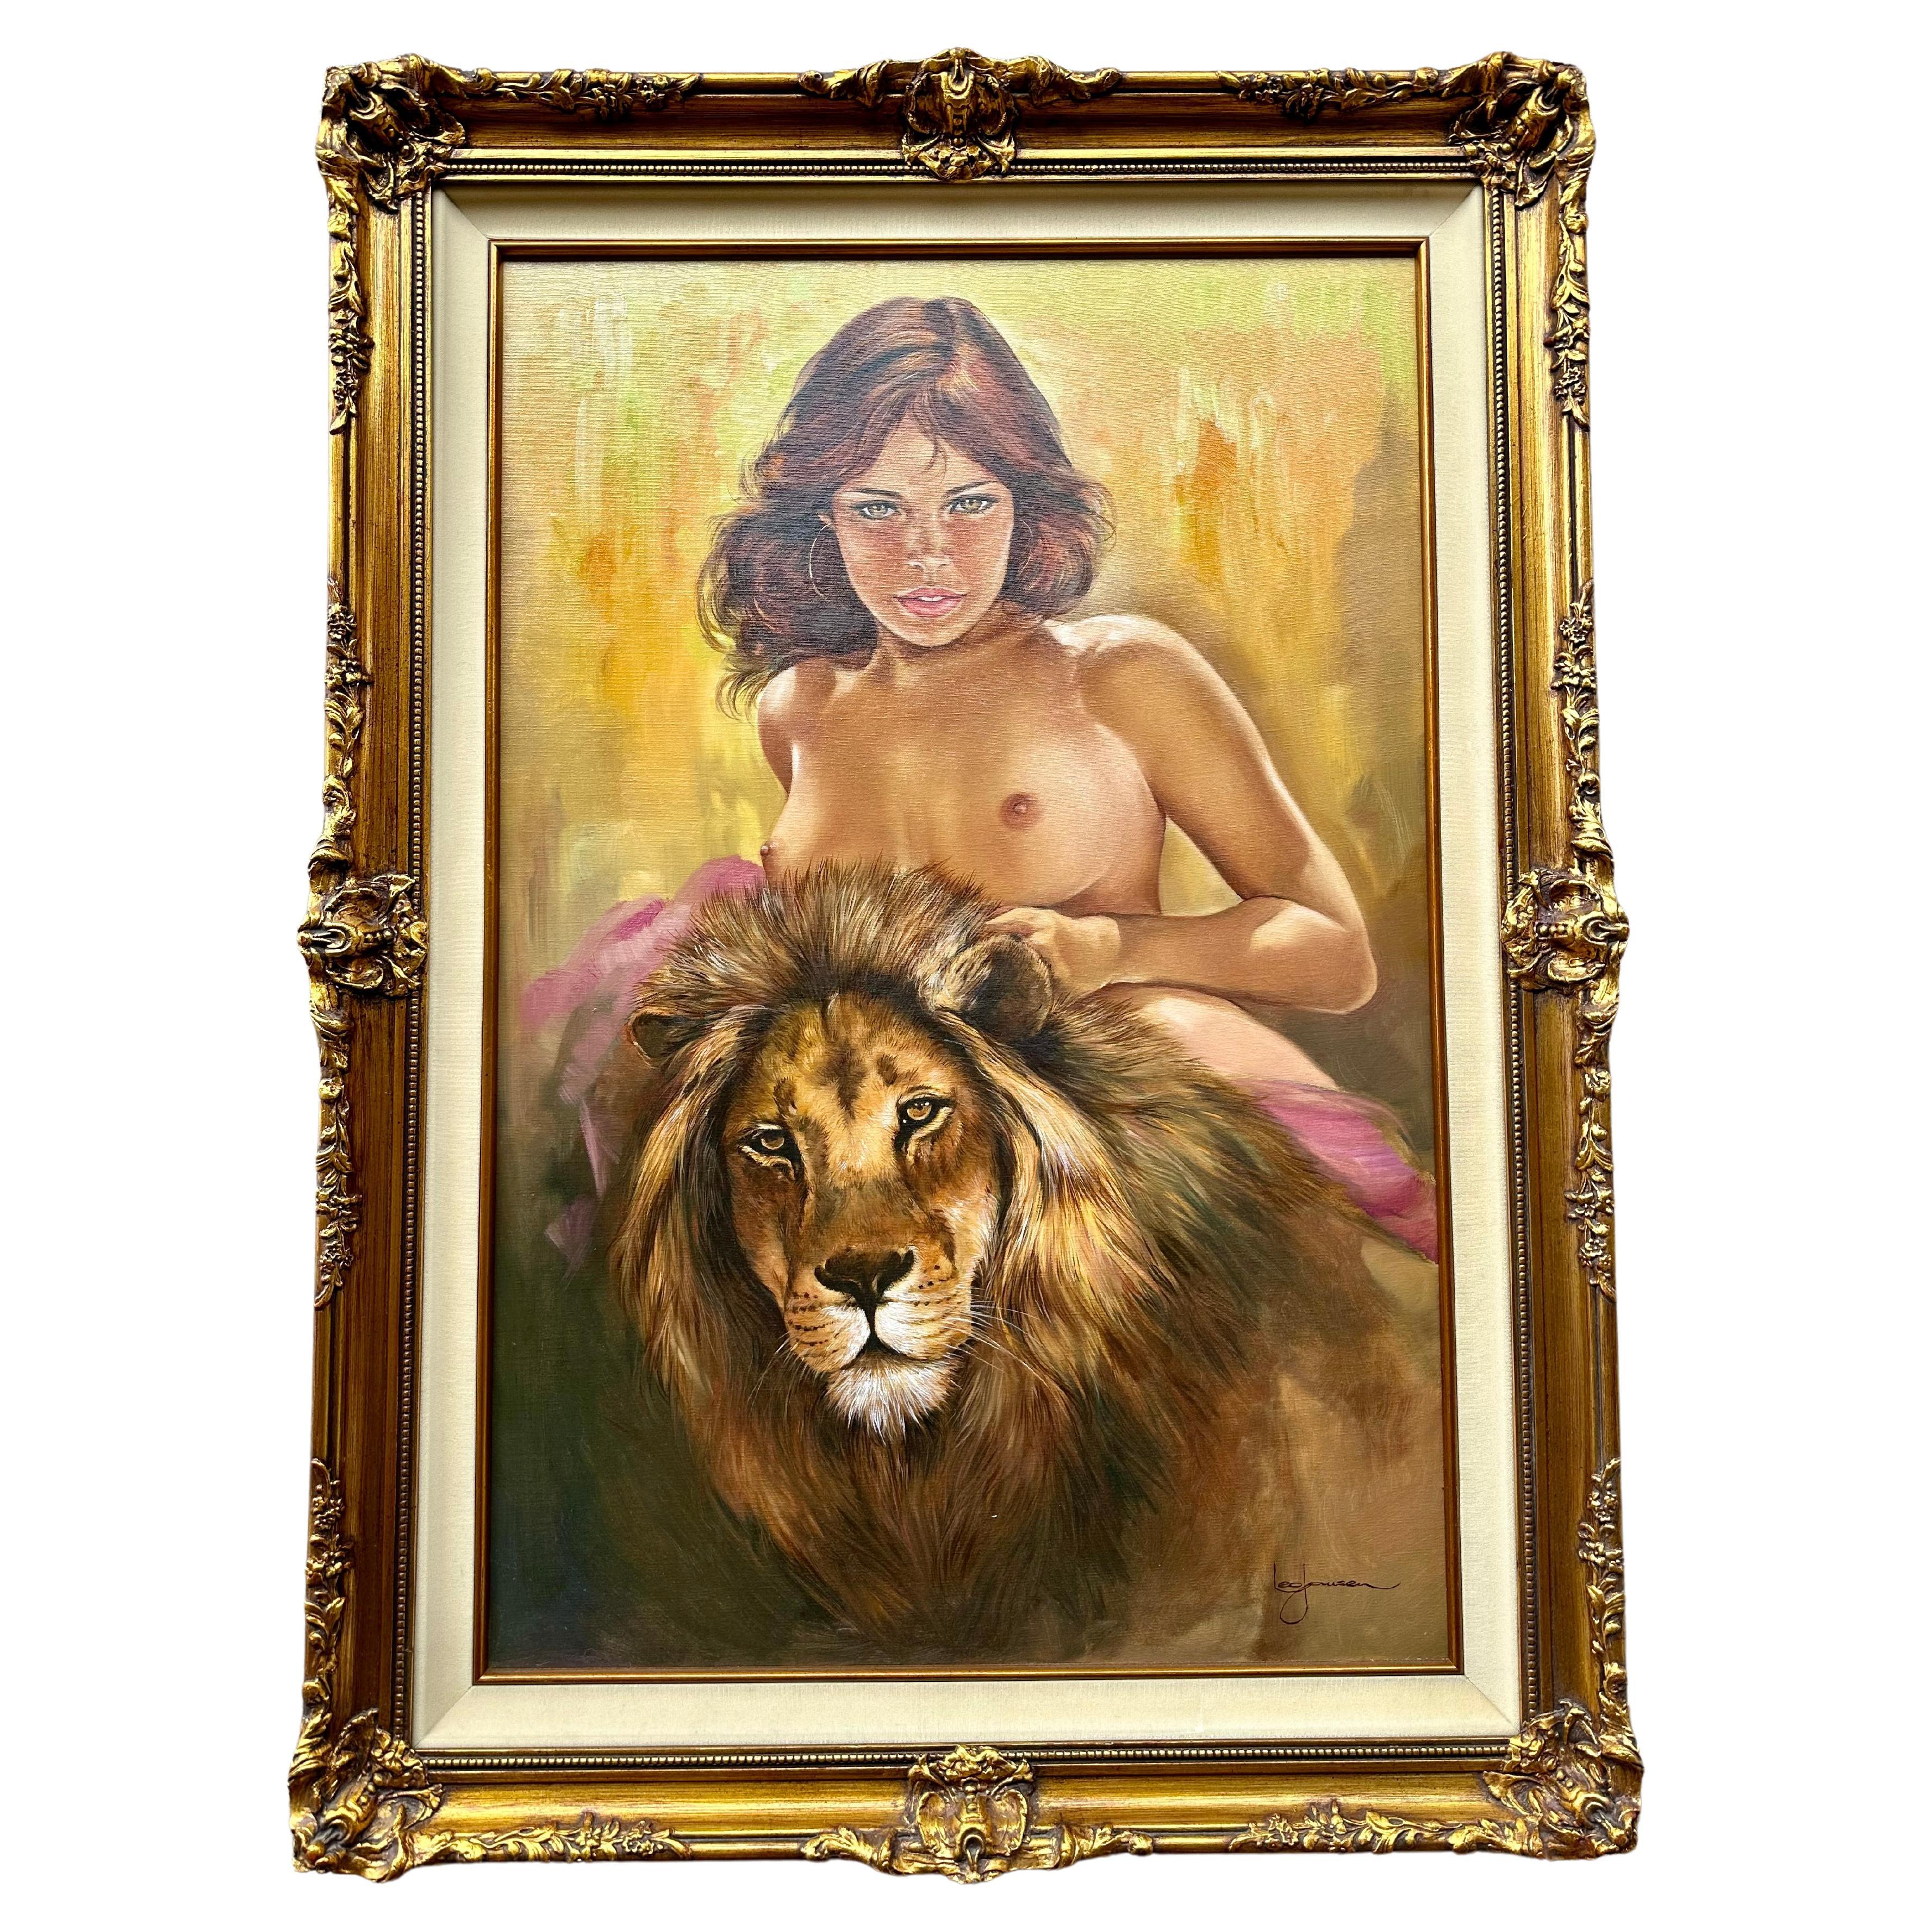 Very captivating, original oil on canvas of a beautiful nude woman with expressive amber eyes and a lion by her side, by famous deceased listed Dutch artist, Leo Jansen (1930-1980).  This is a very unusual Leo Jansen painting as I have never seen